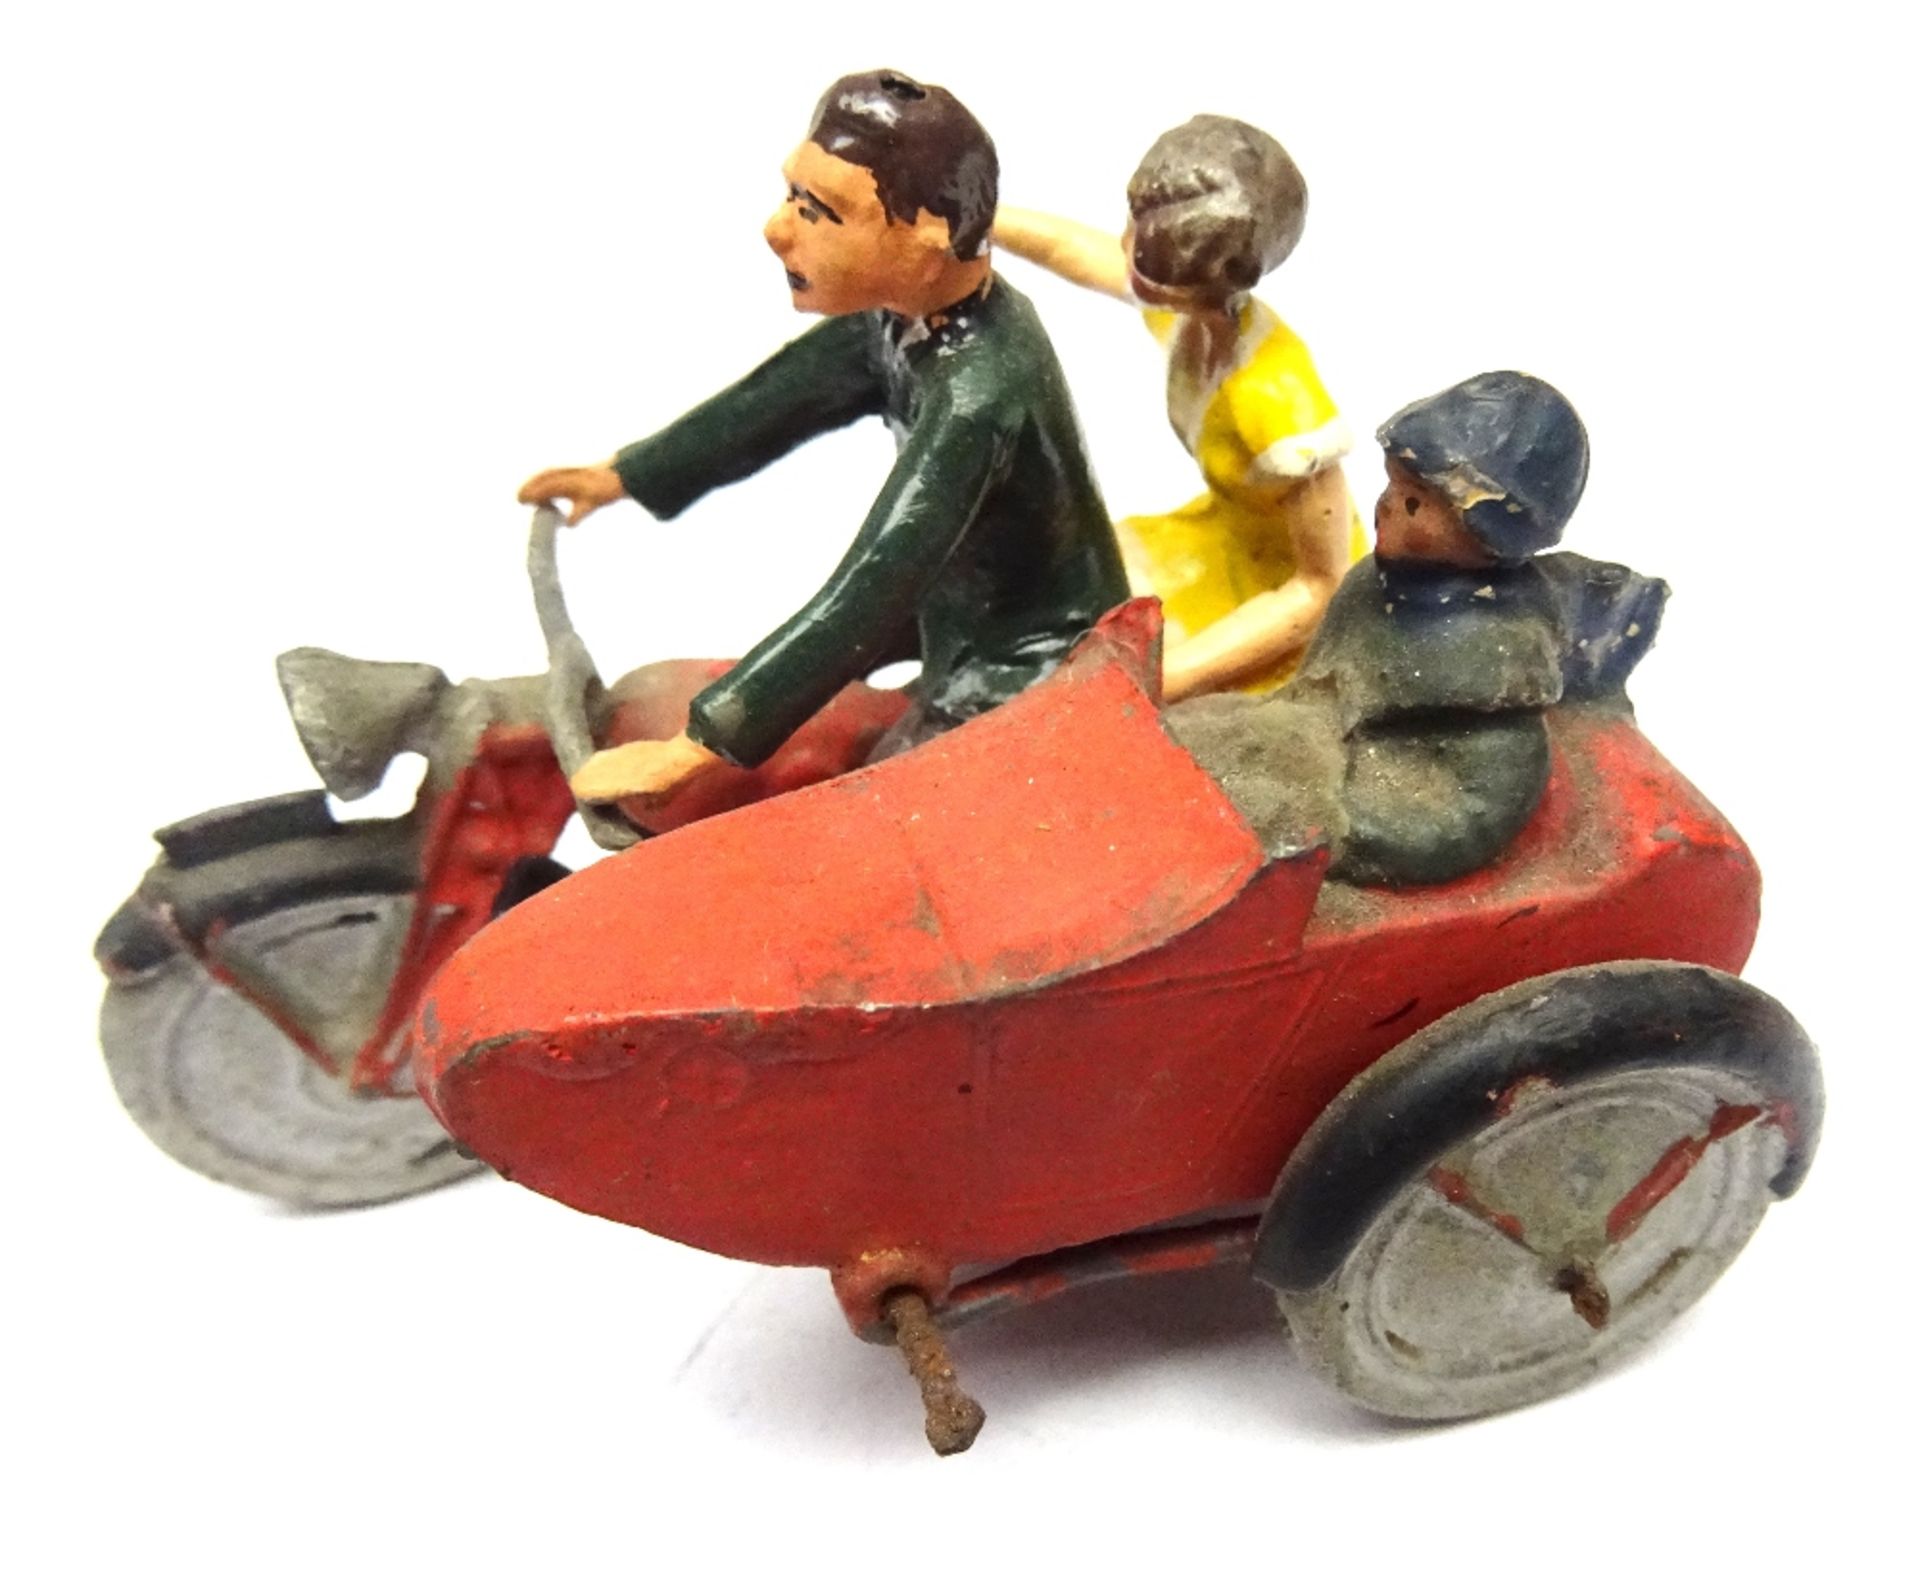 Britains set 641 Civilian Motorcycle and Sidecar - Image 2 of 5